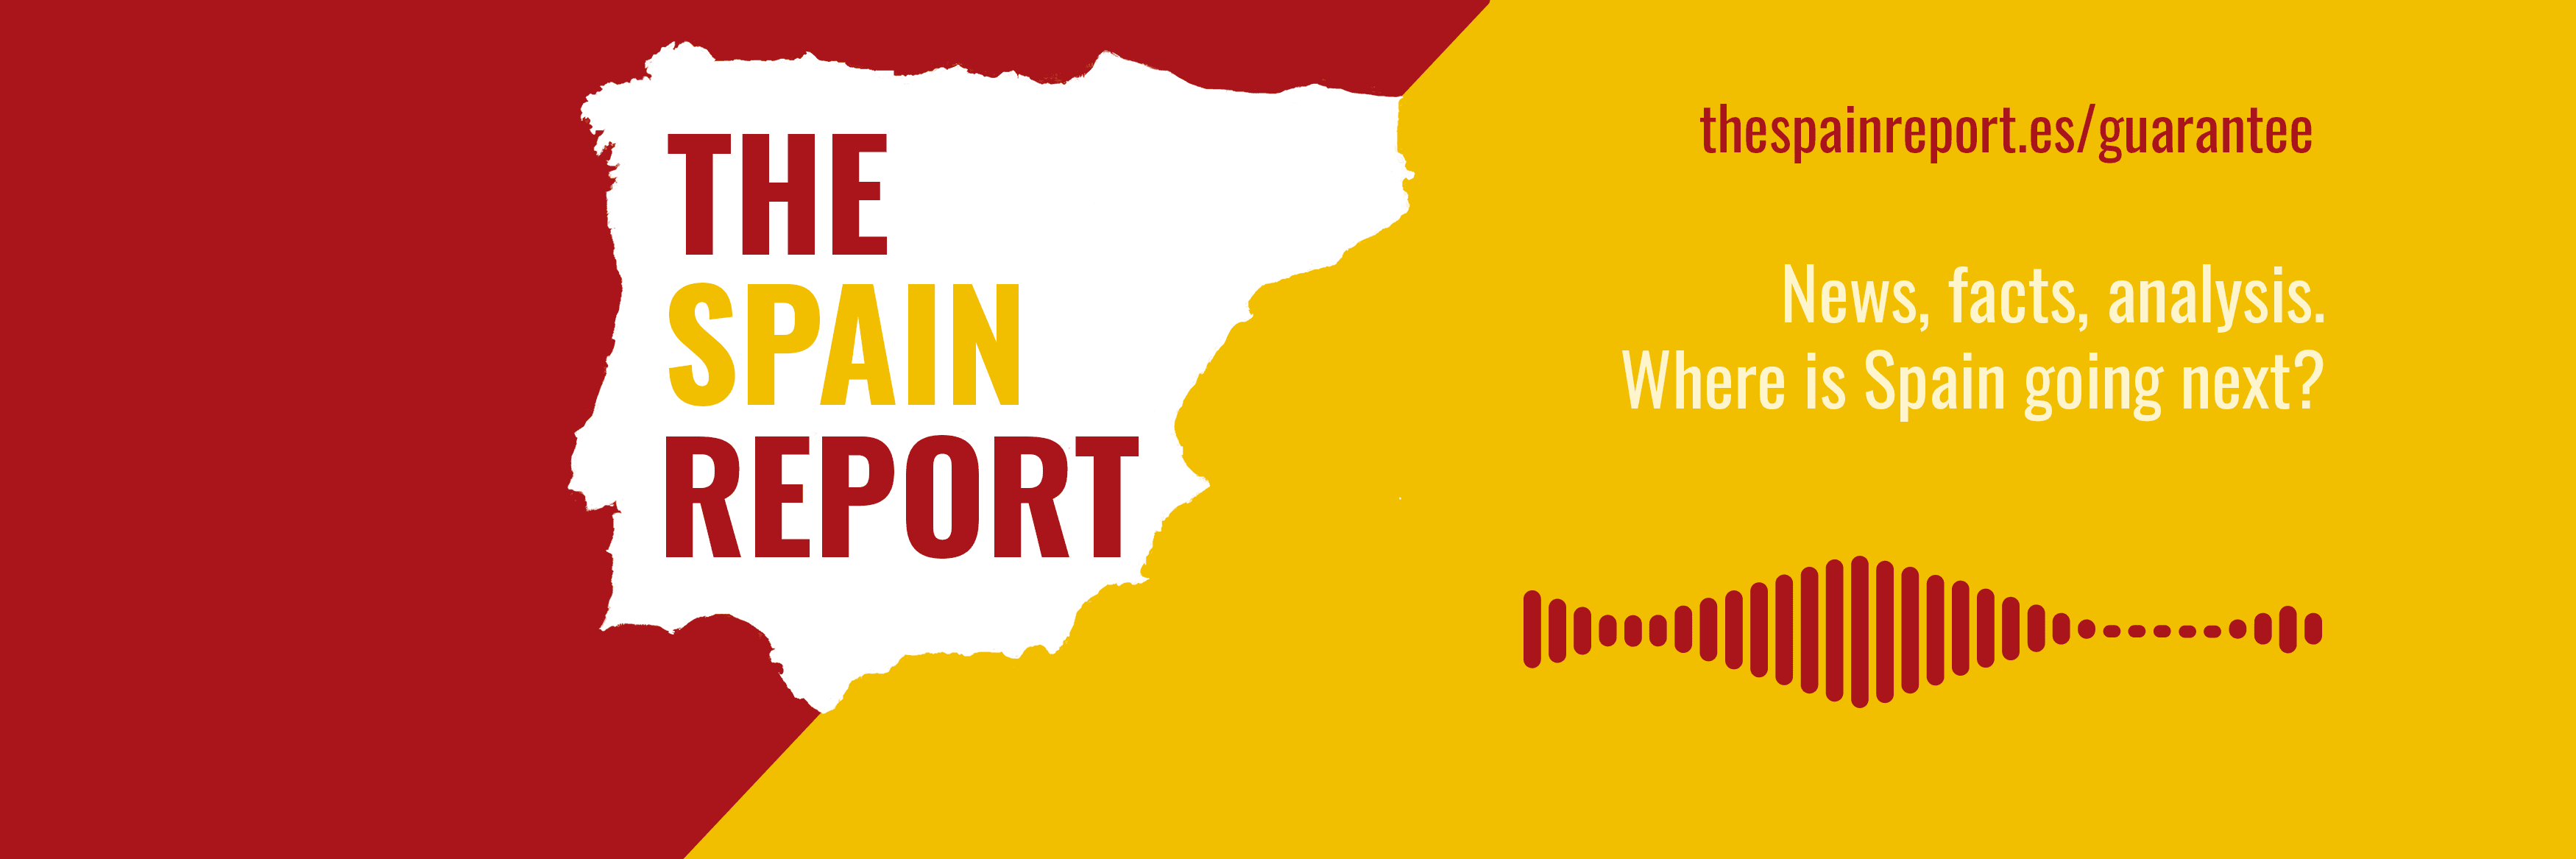 thespainreport banner